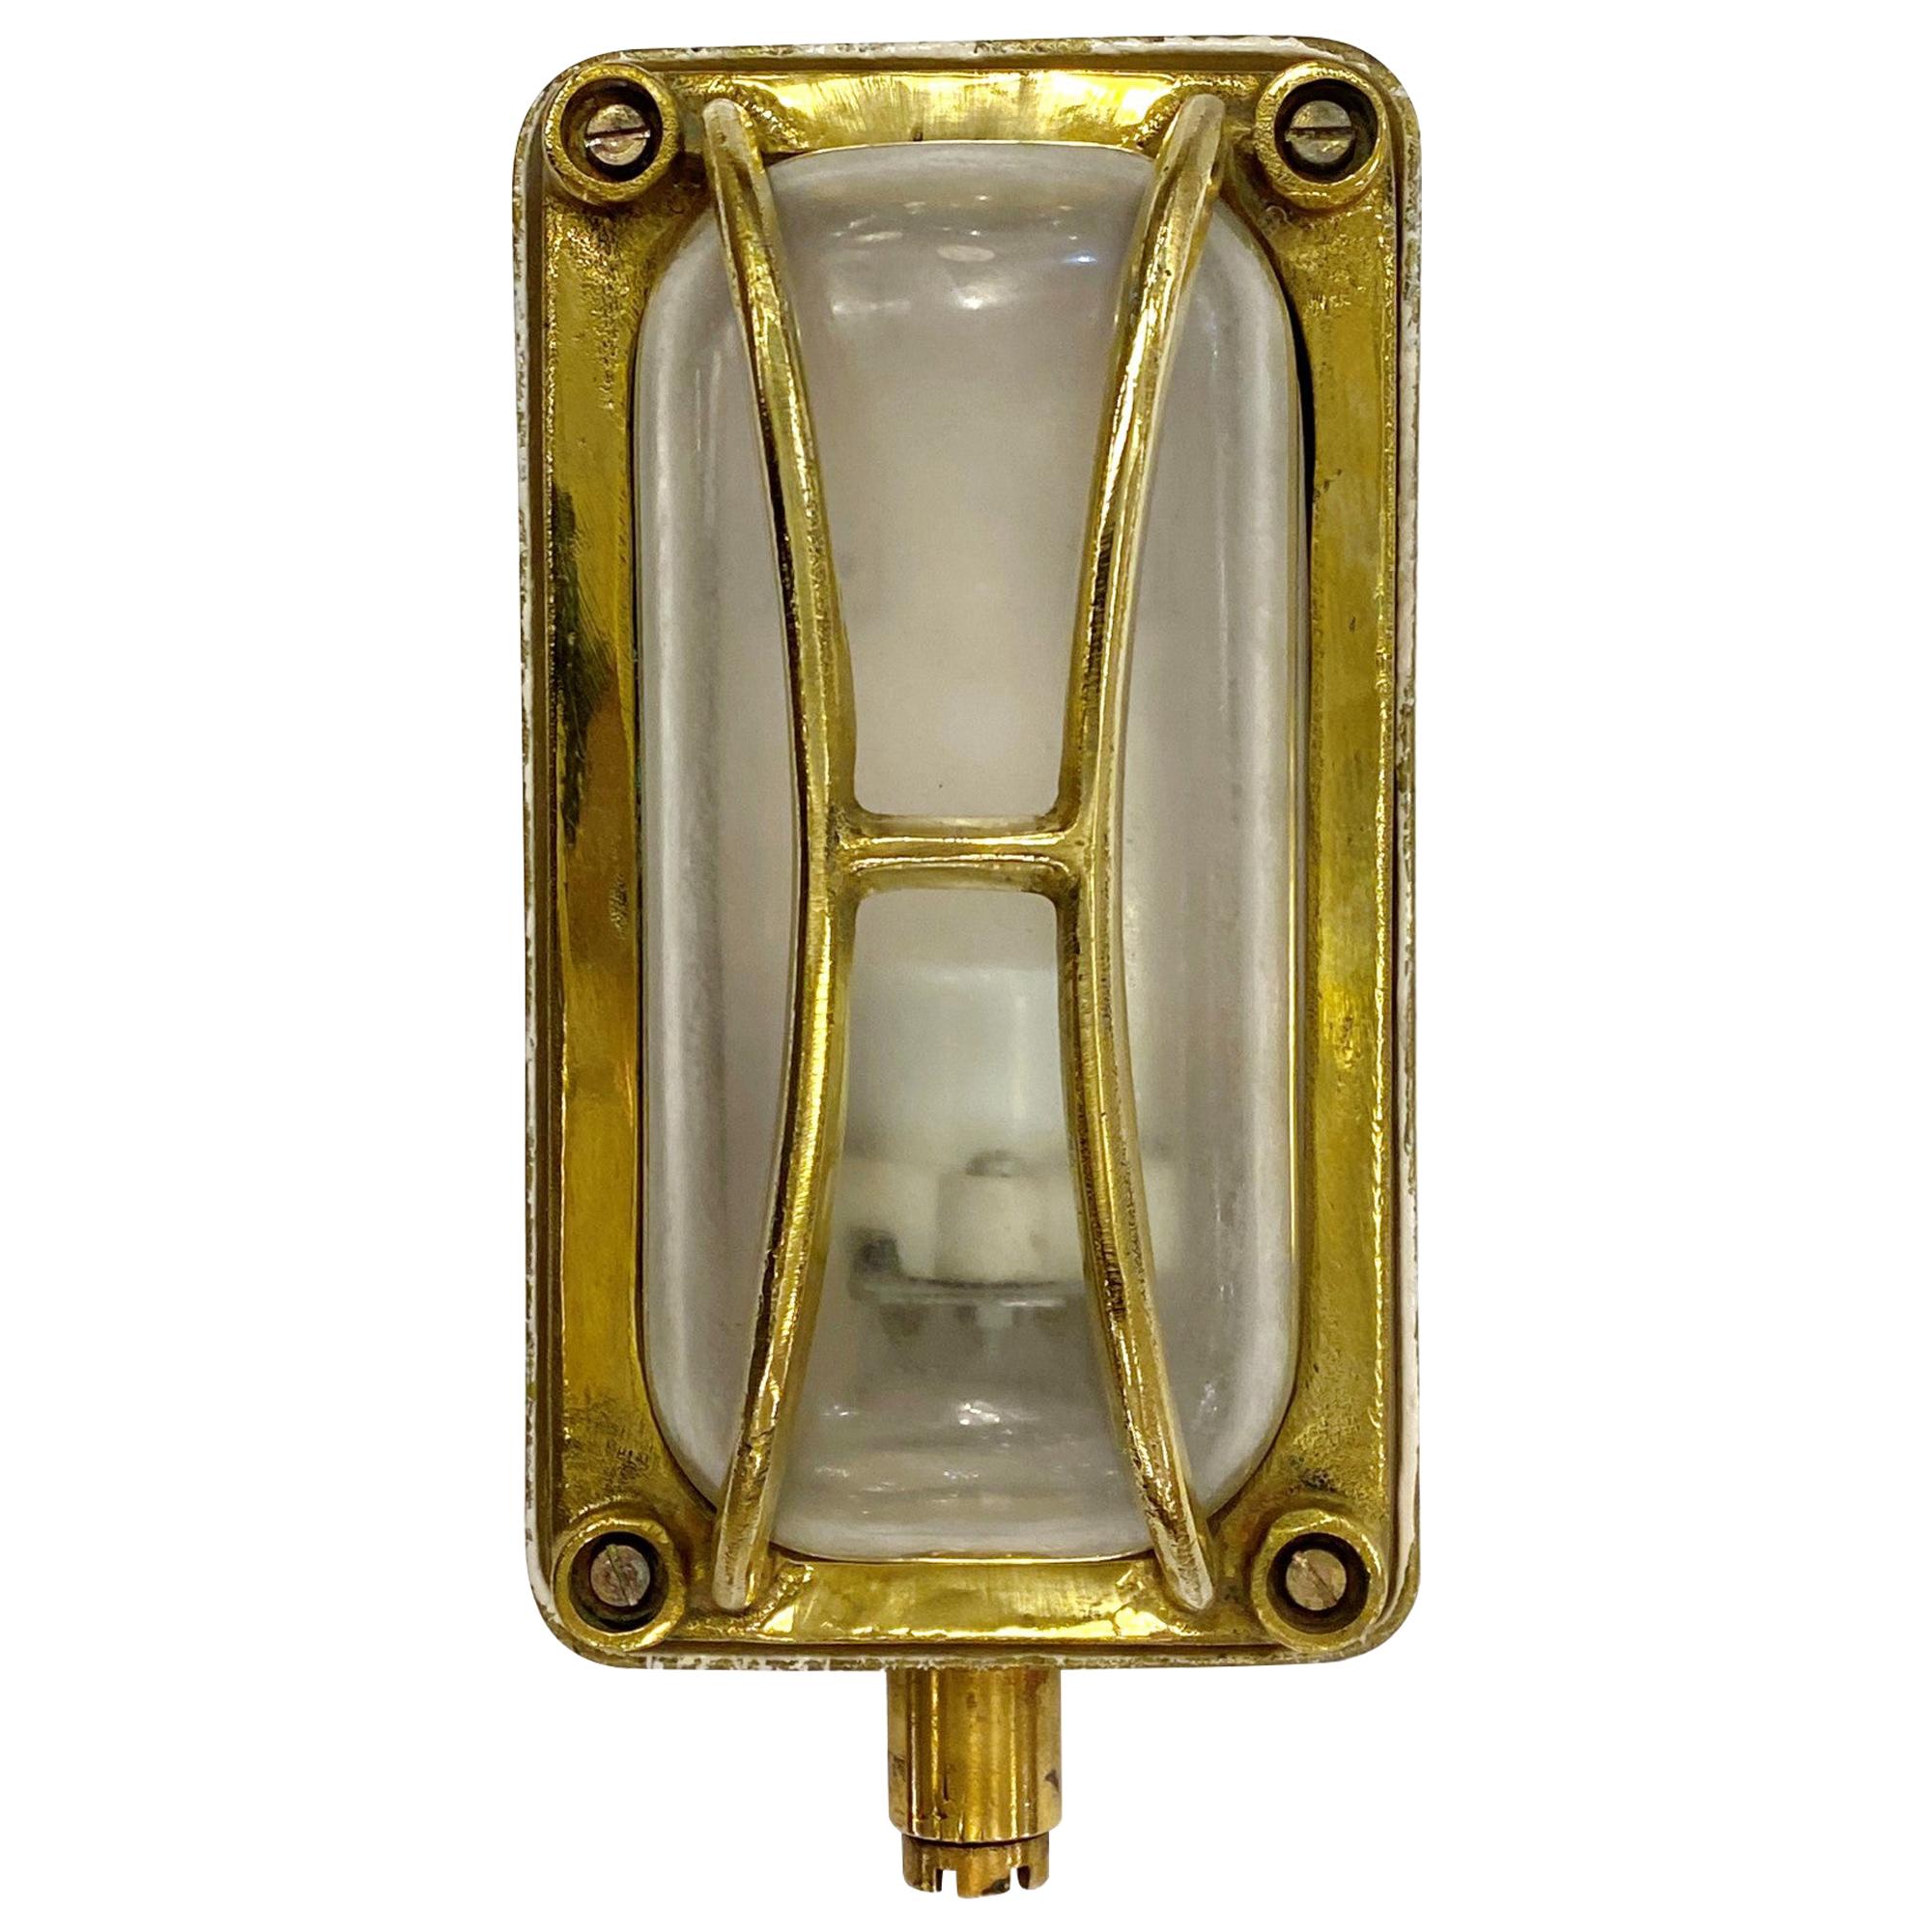 Brass Nautical Ship Sconce Light Rectangular Qty Available Bulkhead Style For Sale